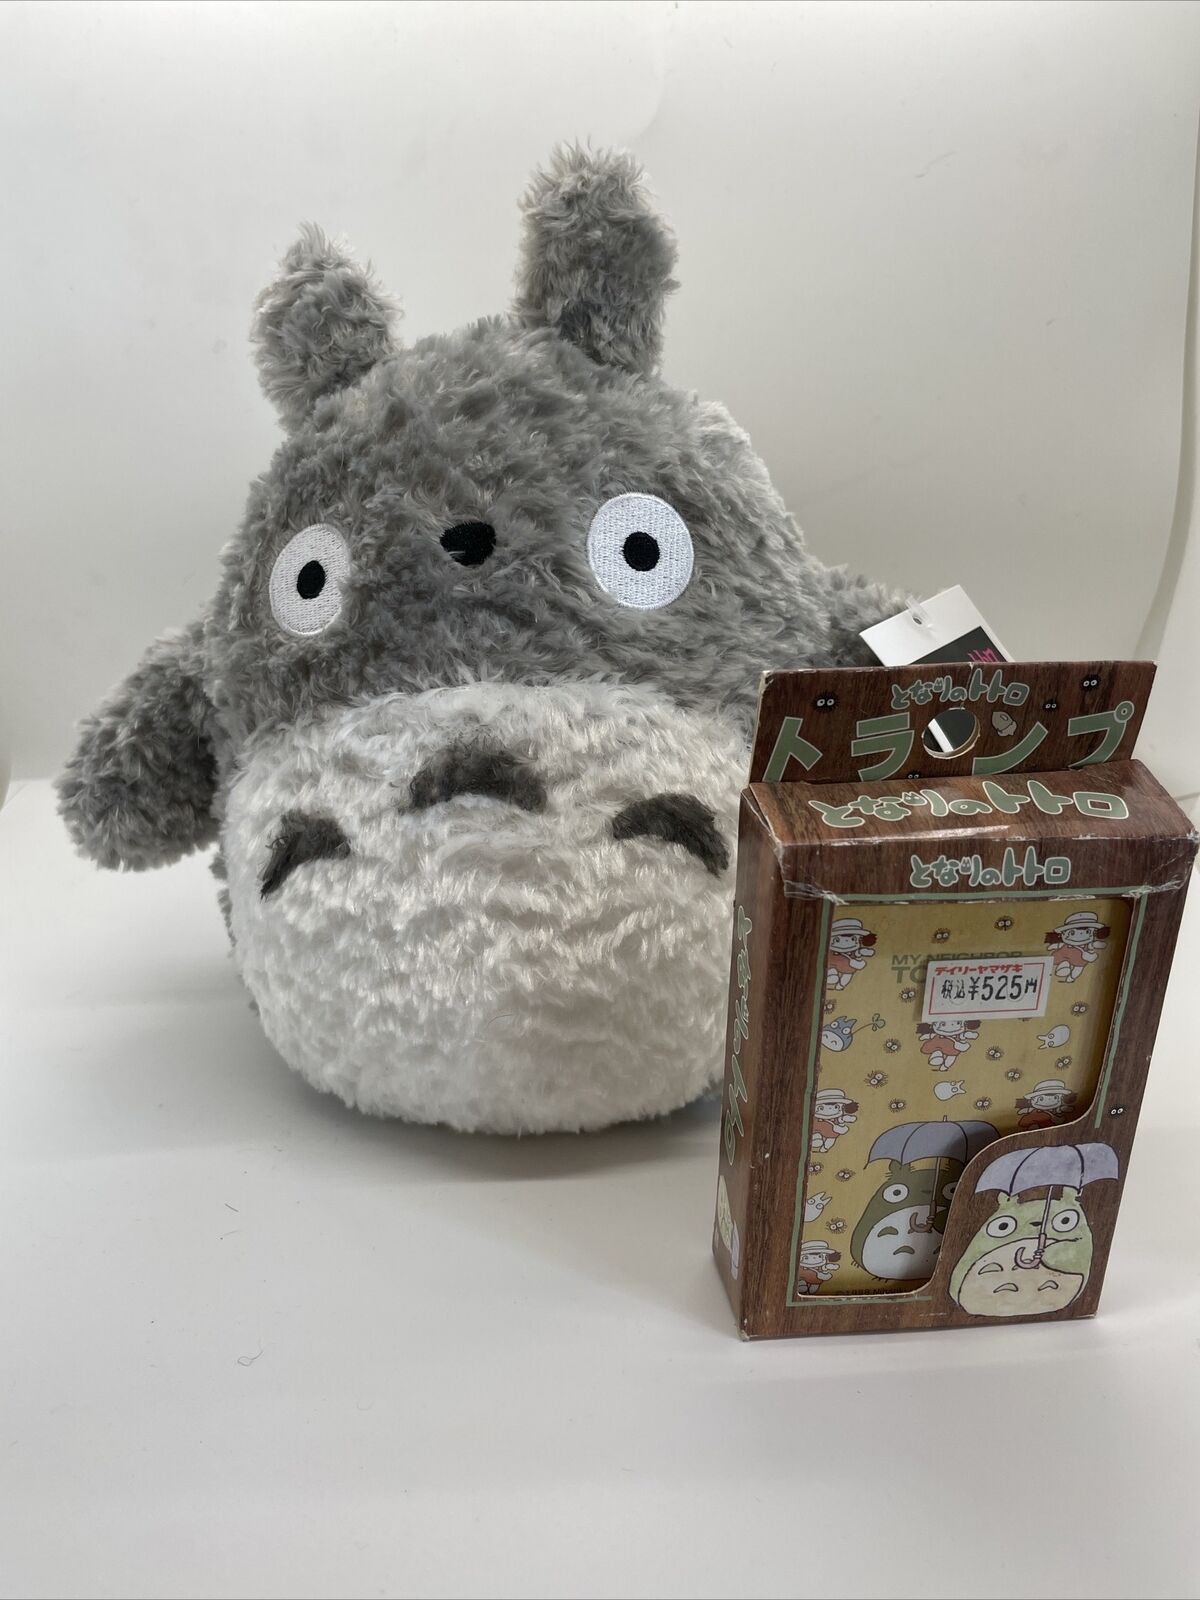 New w/tag My Neighbor Totoro Plush 9” & Playing Cards.